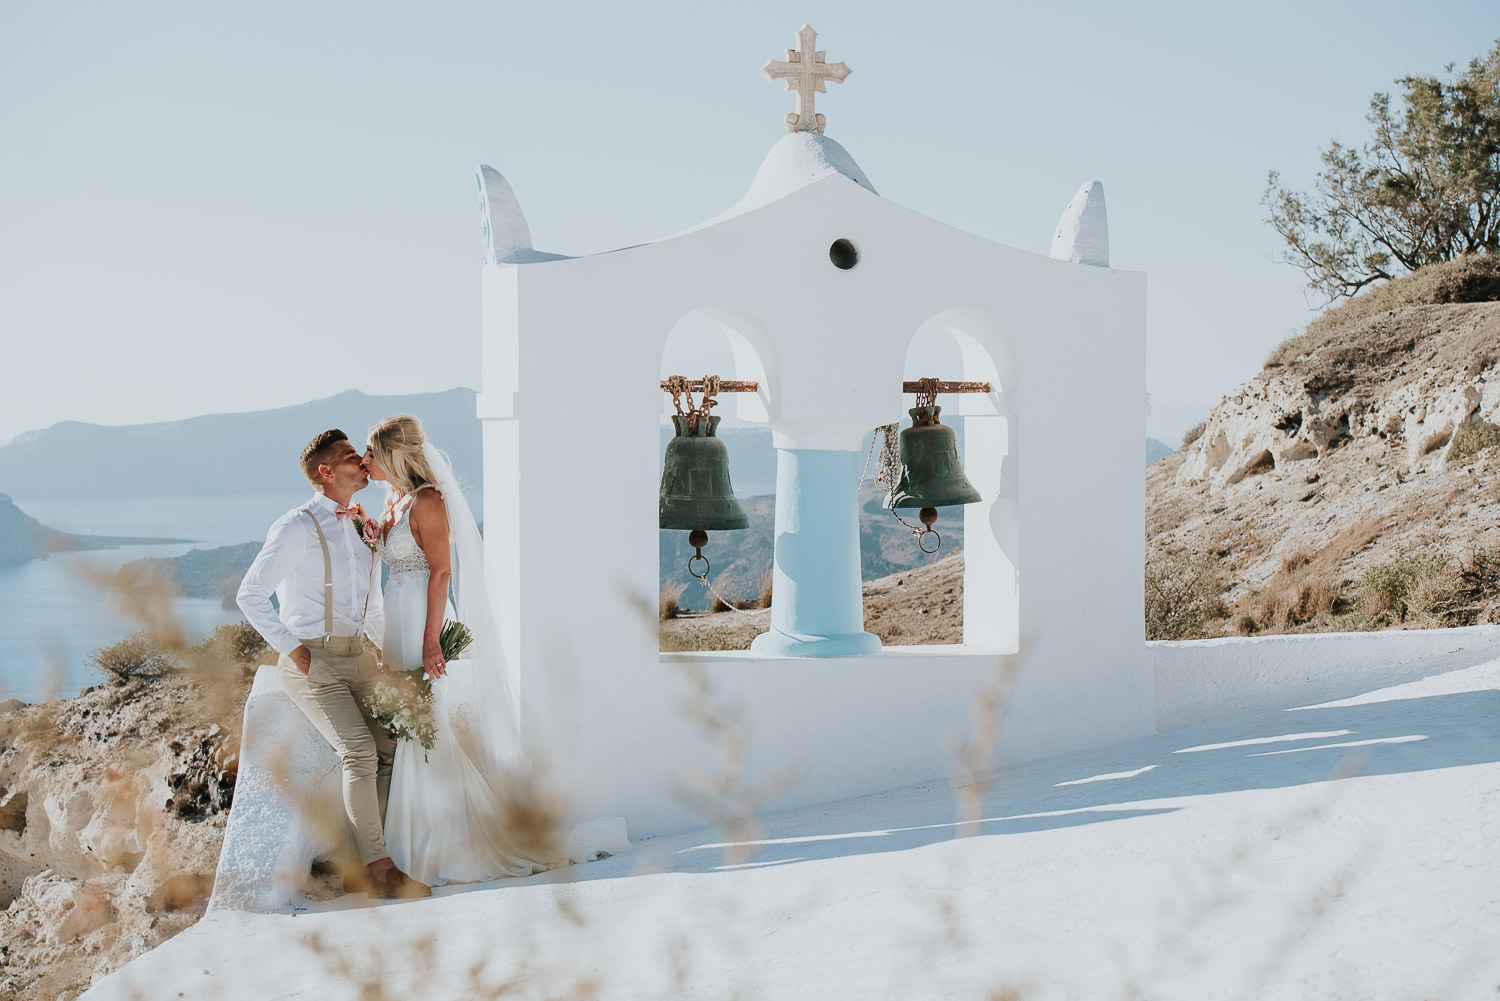 Wedding photographer Santorini: groom kissing bride next to the bell tower basked in the afternoon light by Ben and Vesna.